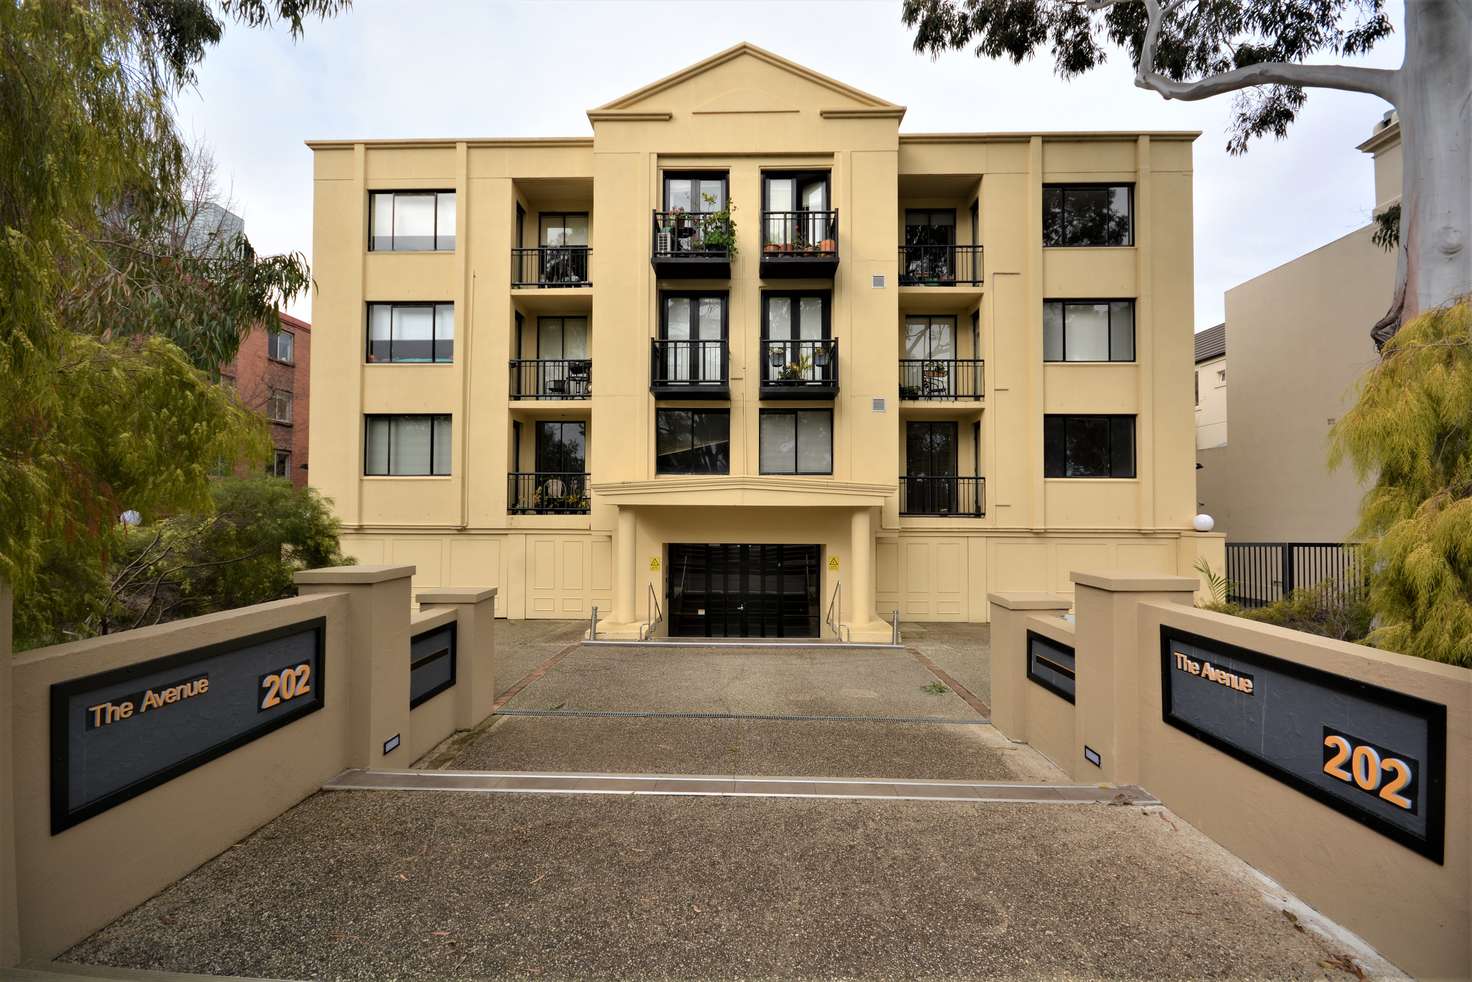 Main view of Homely apartment listing, 43/202 The Avenue, Parkville VIC 3052